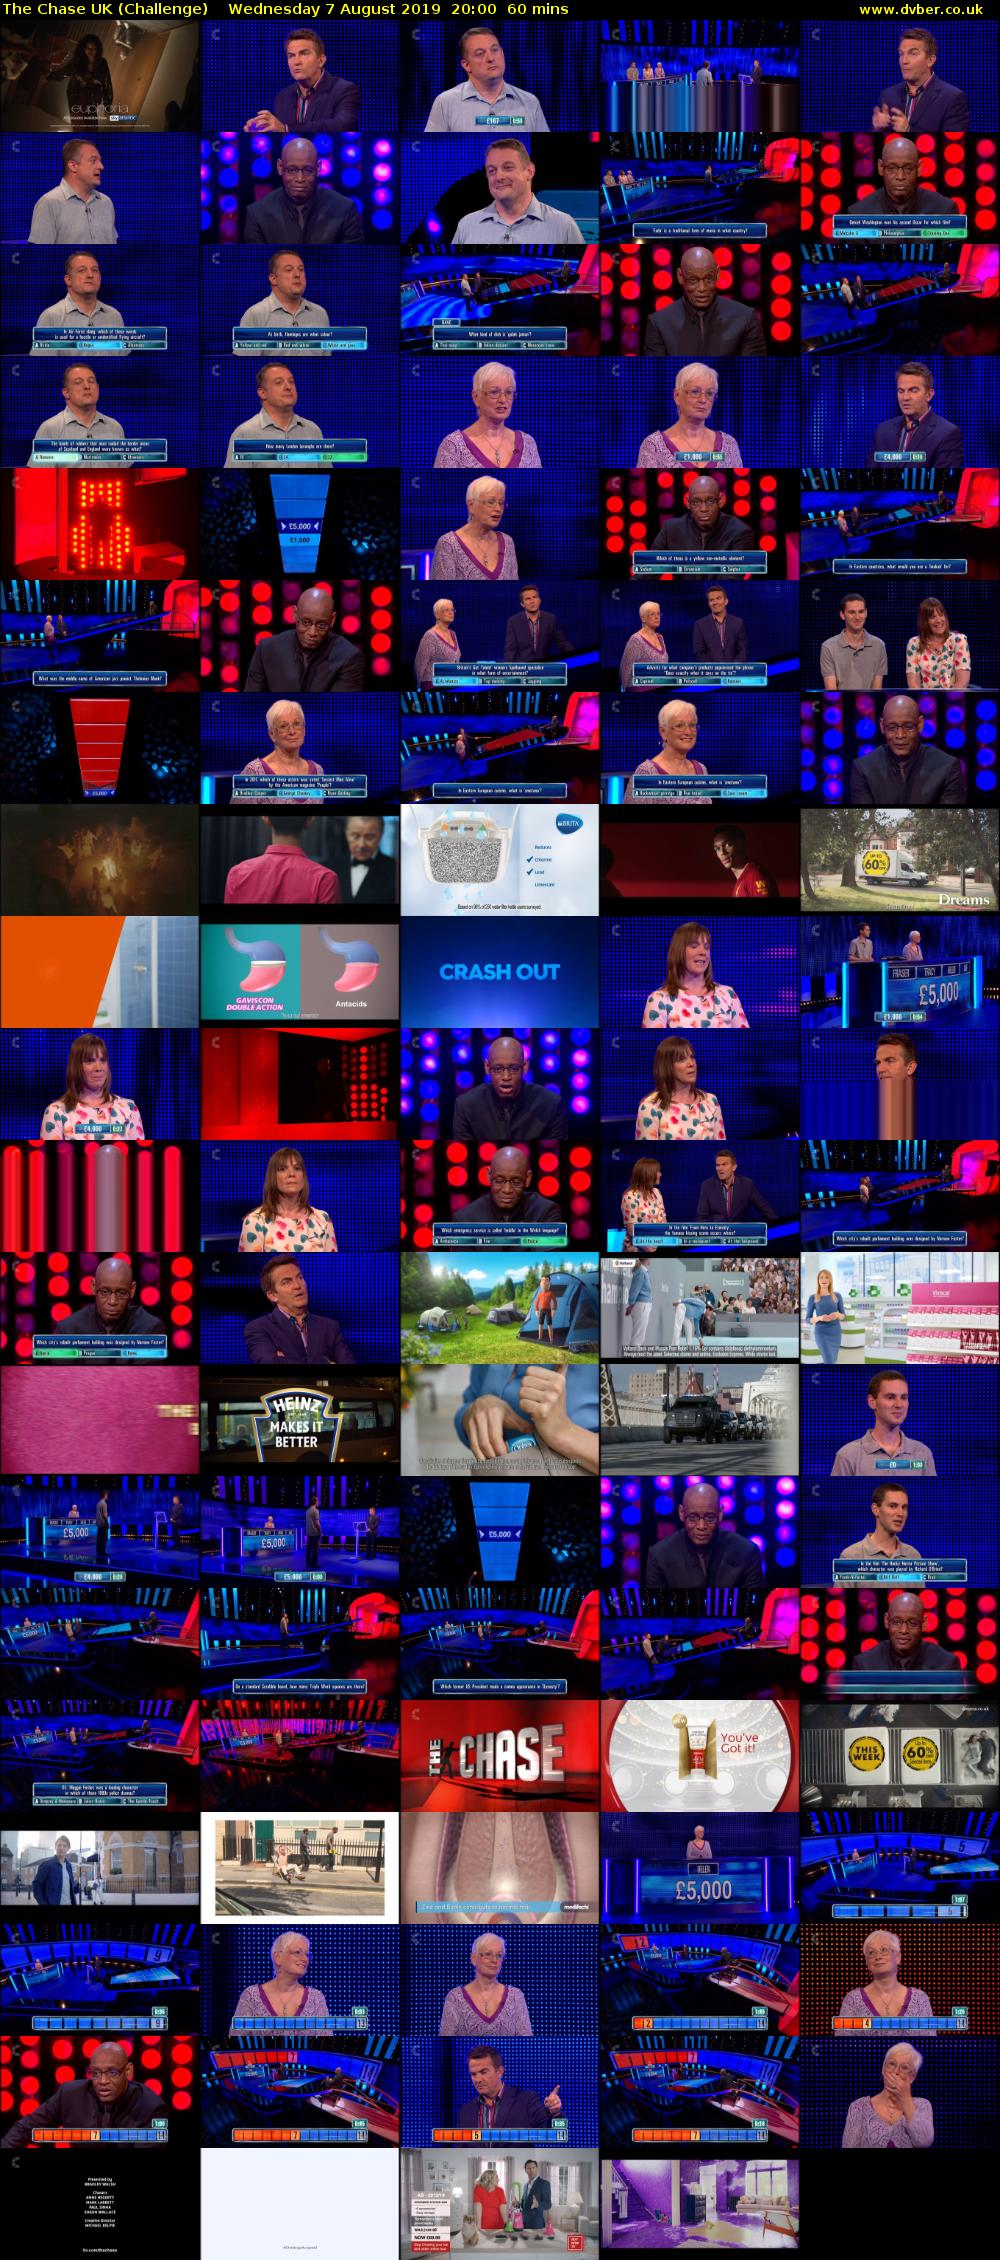 The Chase UK (Challenge) Wednesday 7 August 2019 20:00 - 21:00